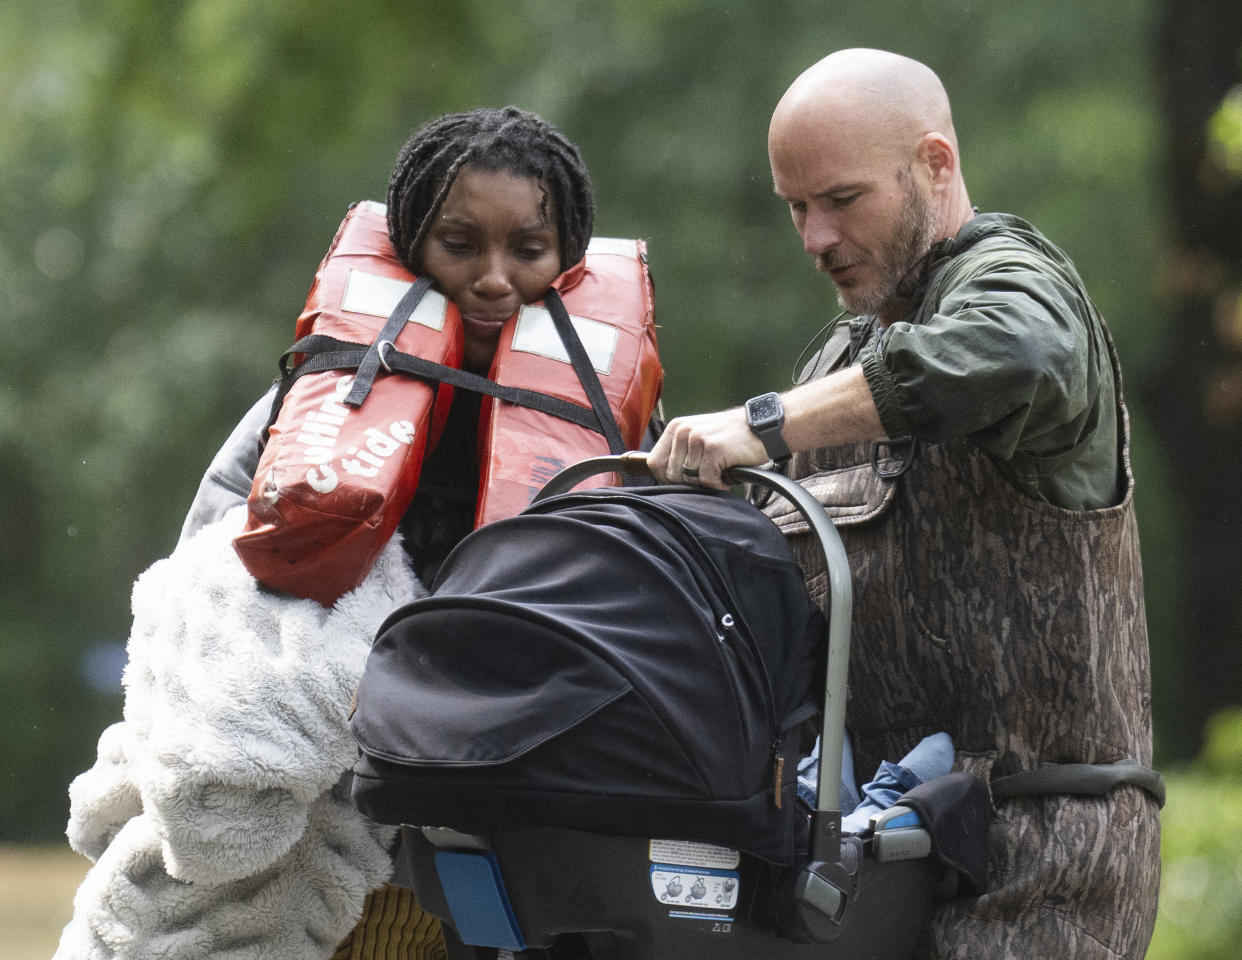 A woman is handed her child after being evacuated by boat.